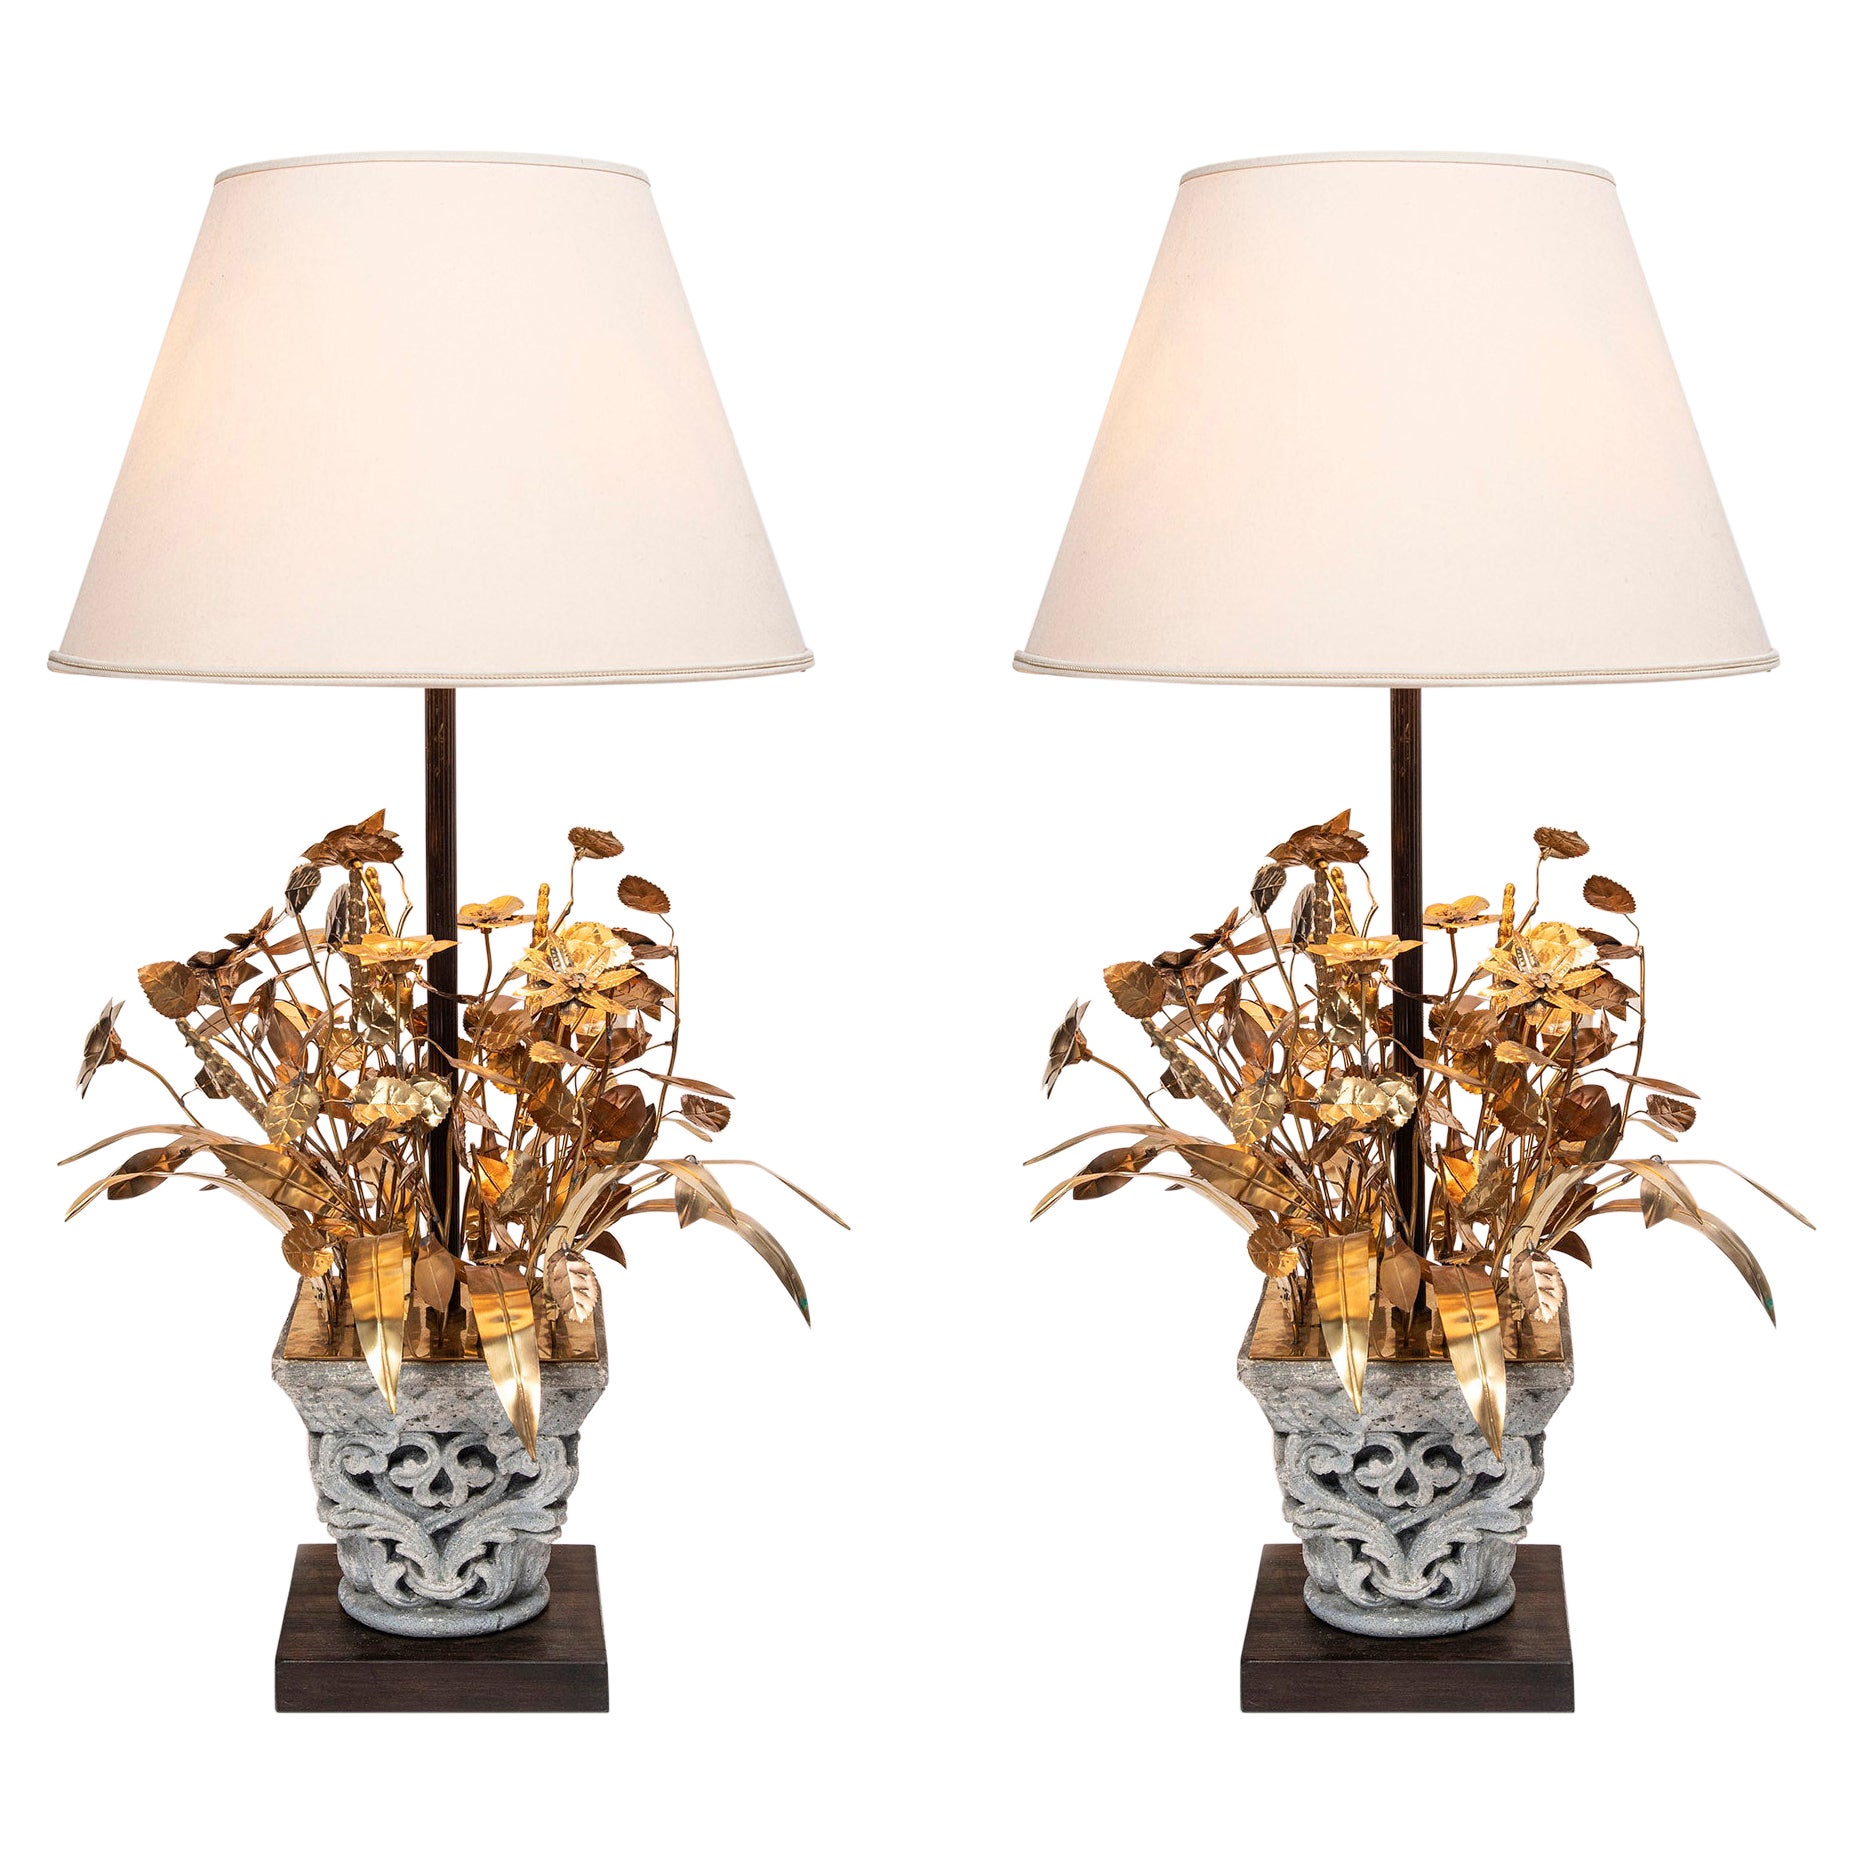 Pair of Bronze and Paris Stone Table Lamps, Attributed to Maison Jansen, C. 1950